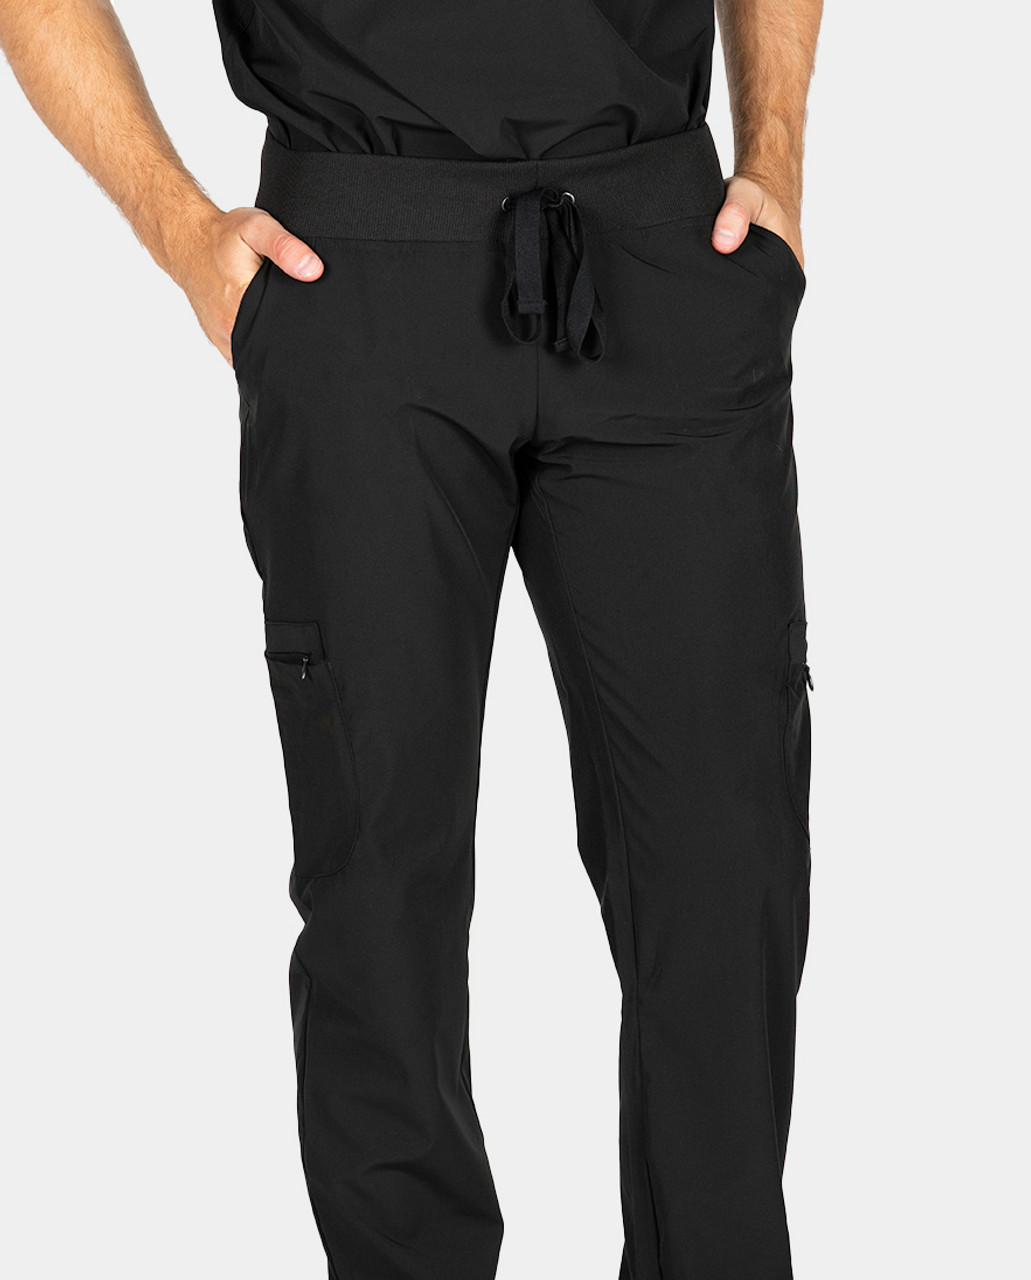 Carhartt Men's Straight Fit Mid-Rise Athletic Cargo Scrub Pants at